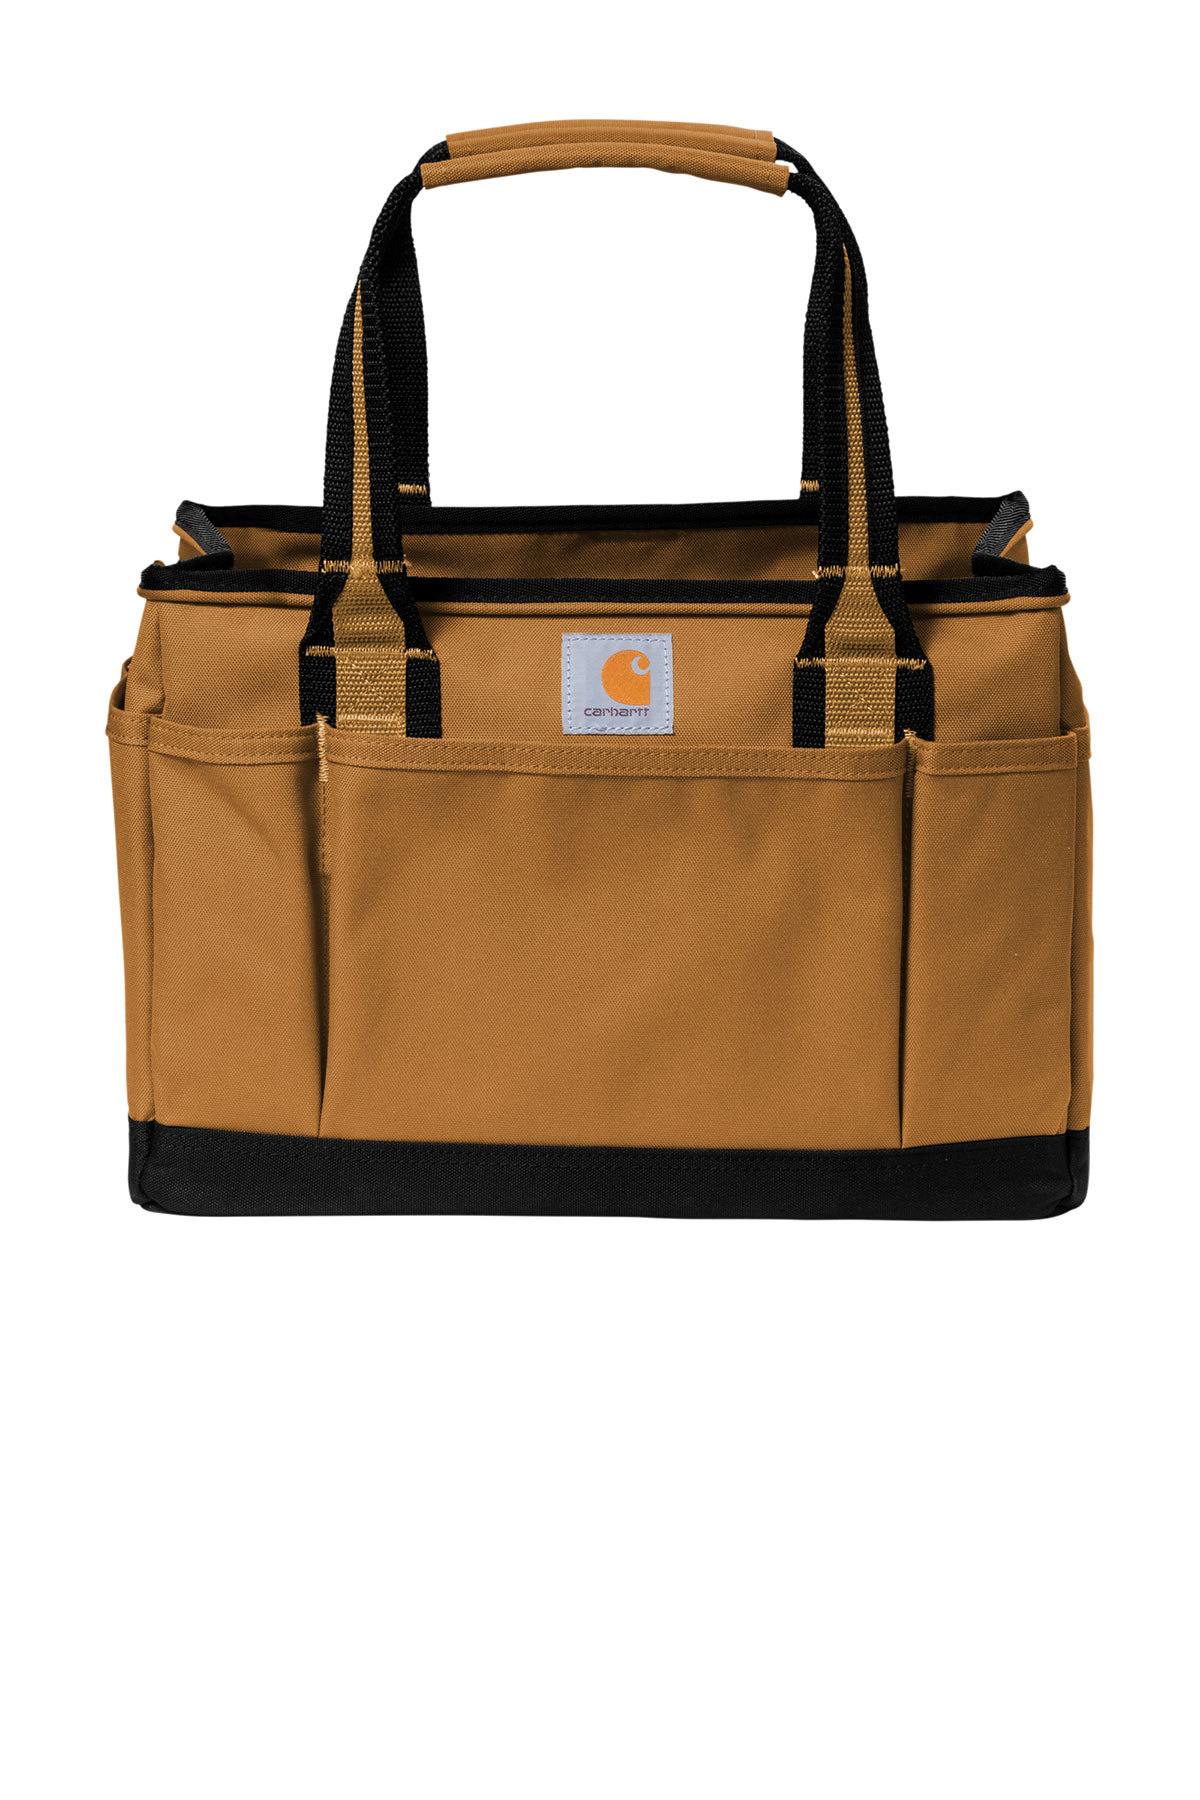 Carhartt Utility Tote, Product